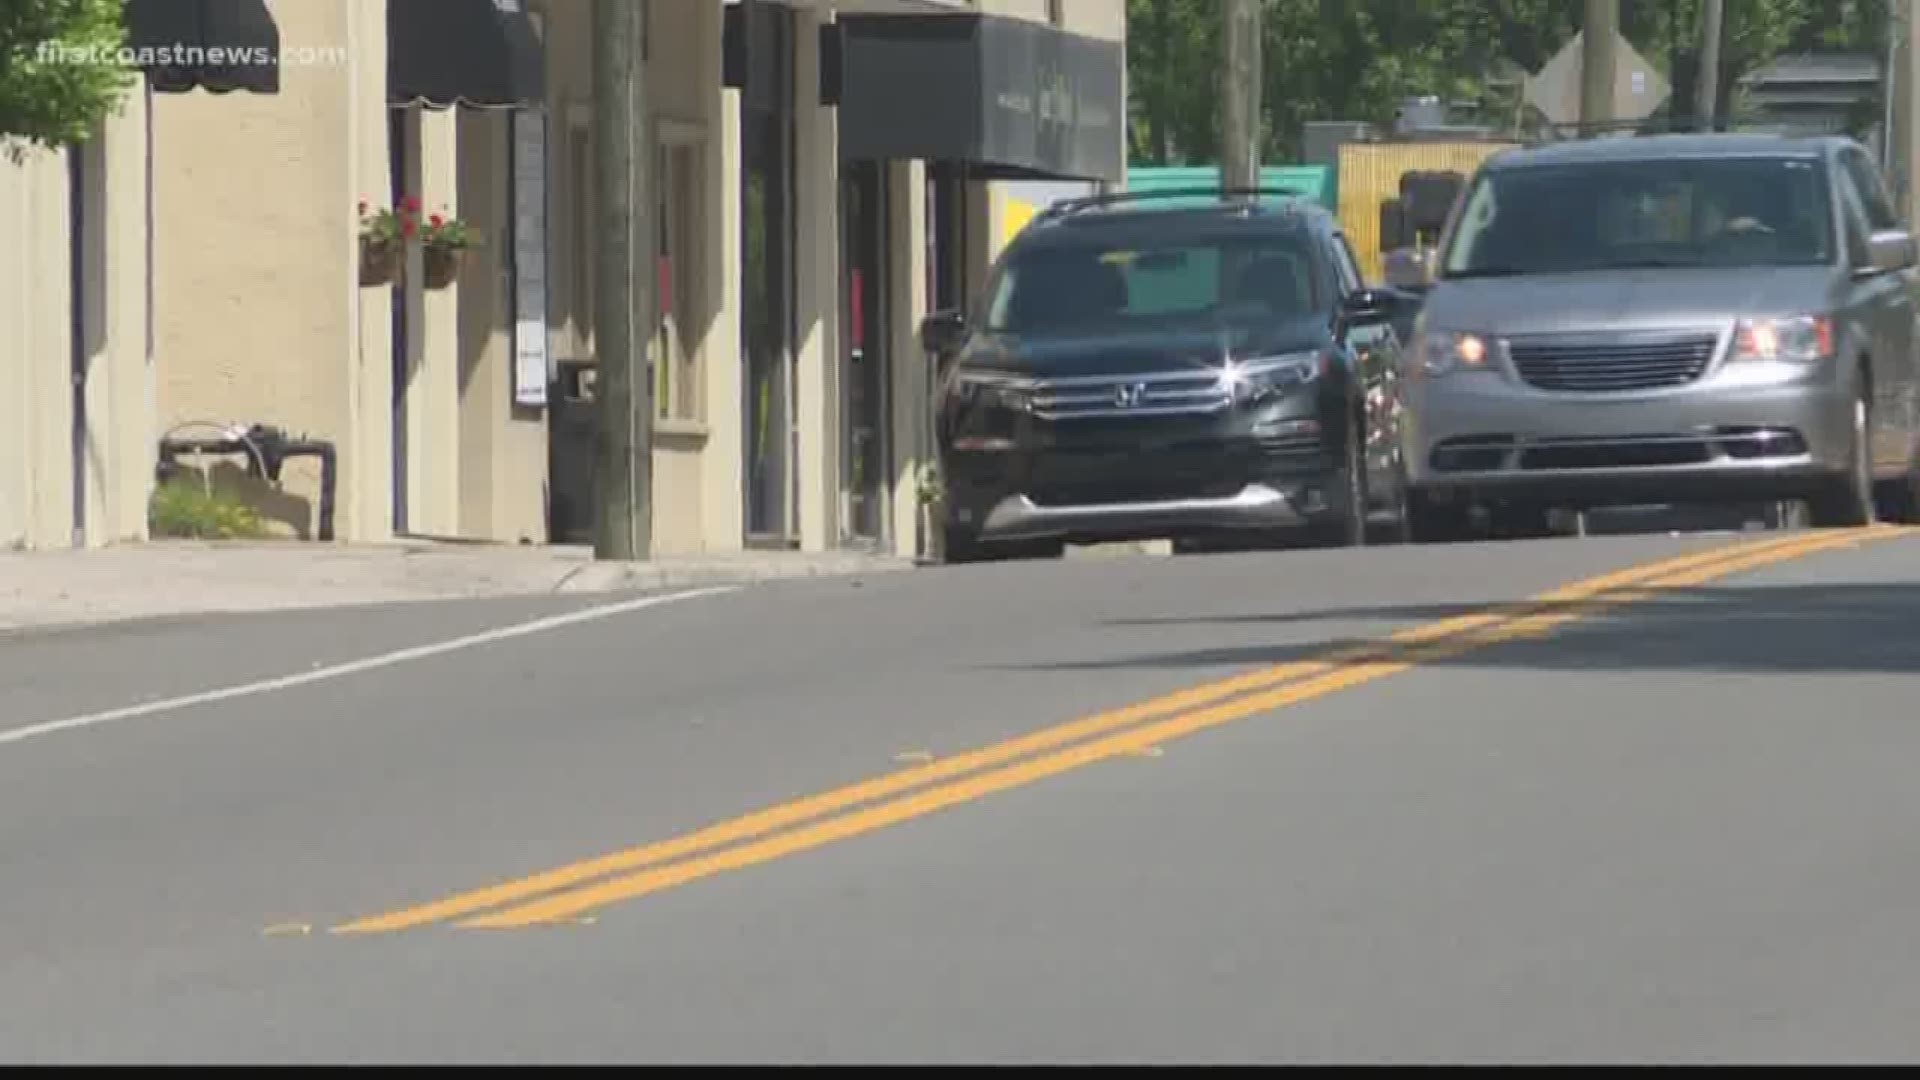 A risky San Marco road is in need of some safeguarding, according to locals.